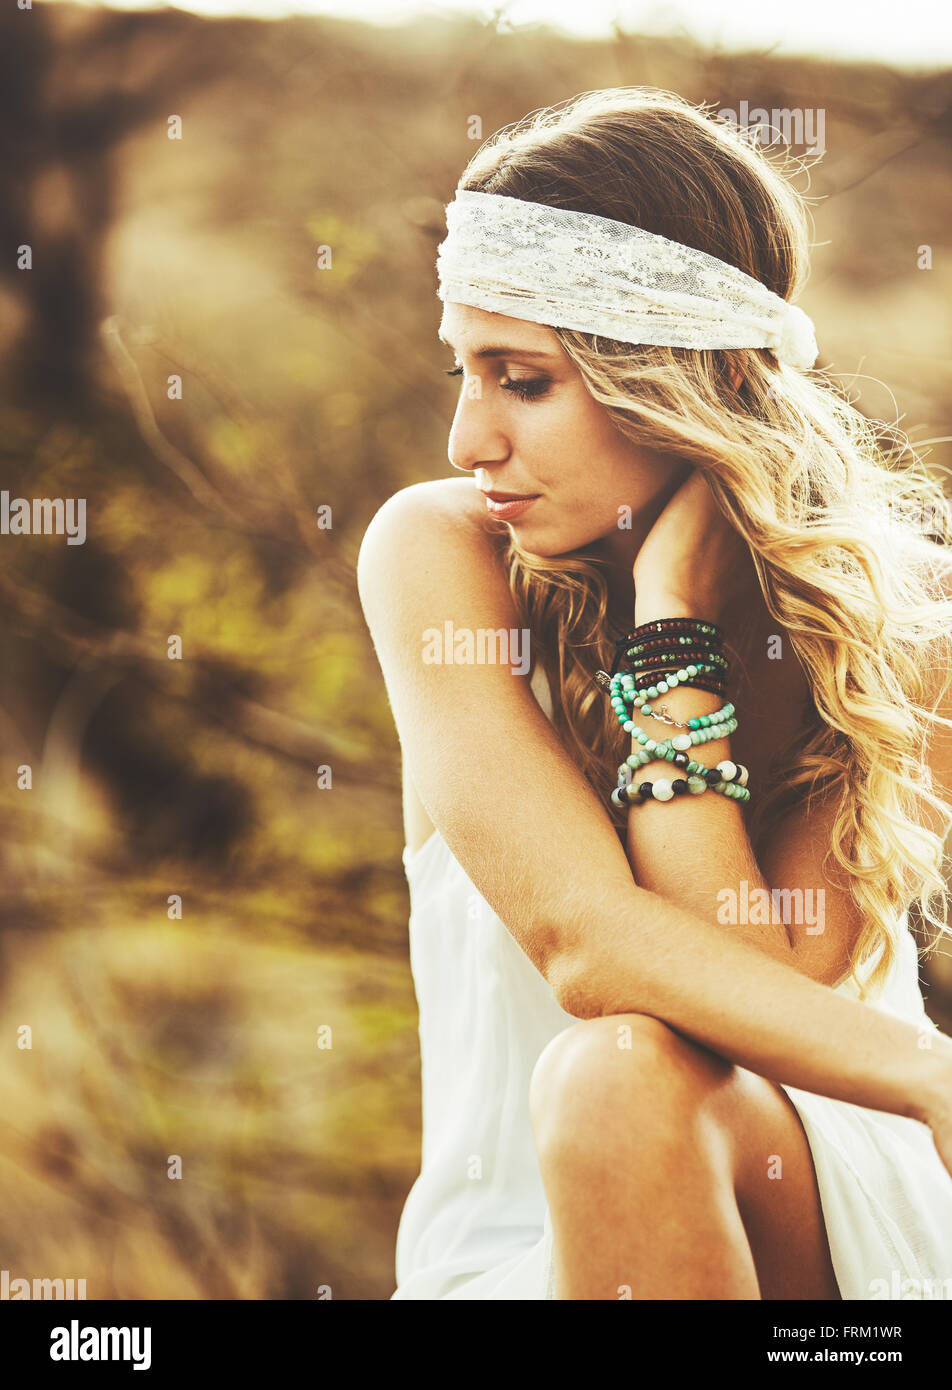 Fashion Lifestyle. Fashion Portrait of Beautiful Young Woman Outdoors. Soft warm vintage color tone. Artsy Bohemian Style. Stock Photo